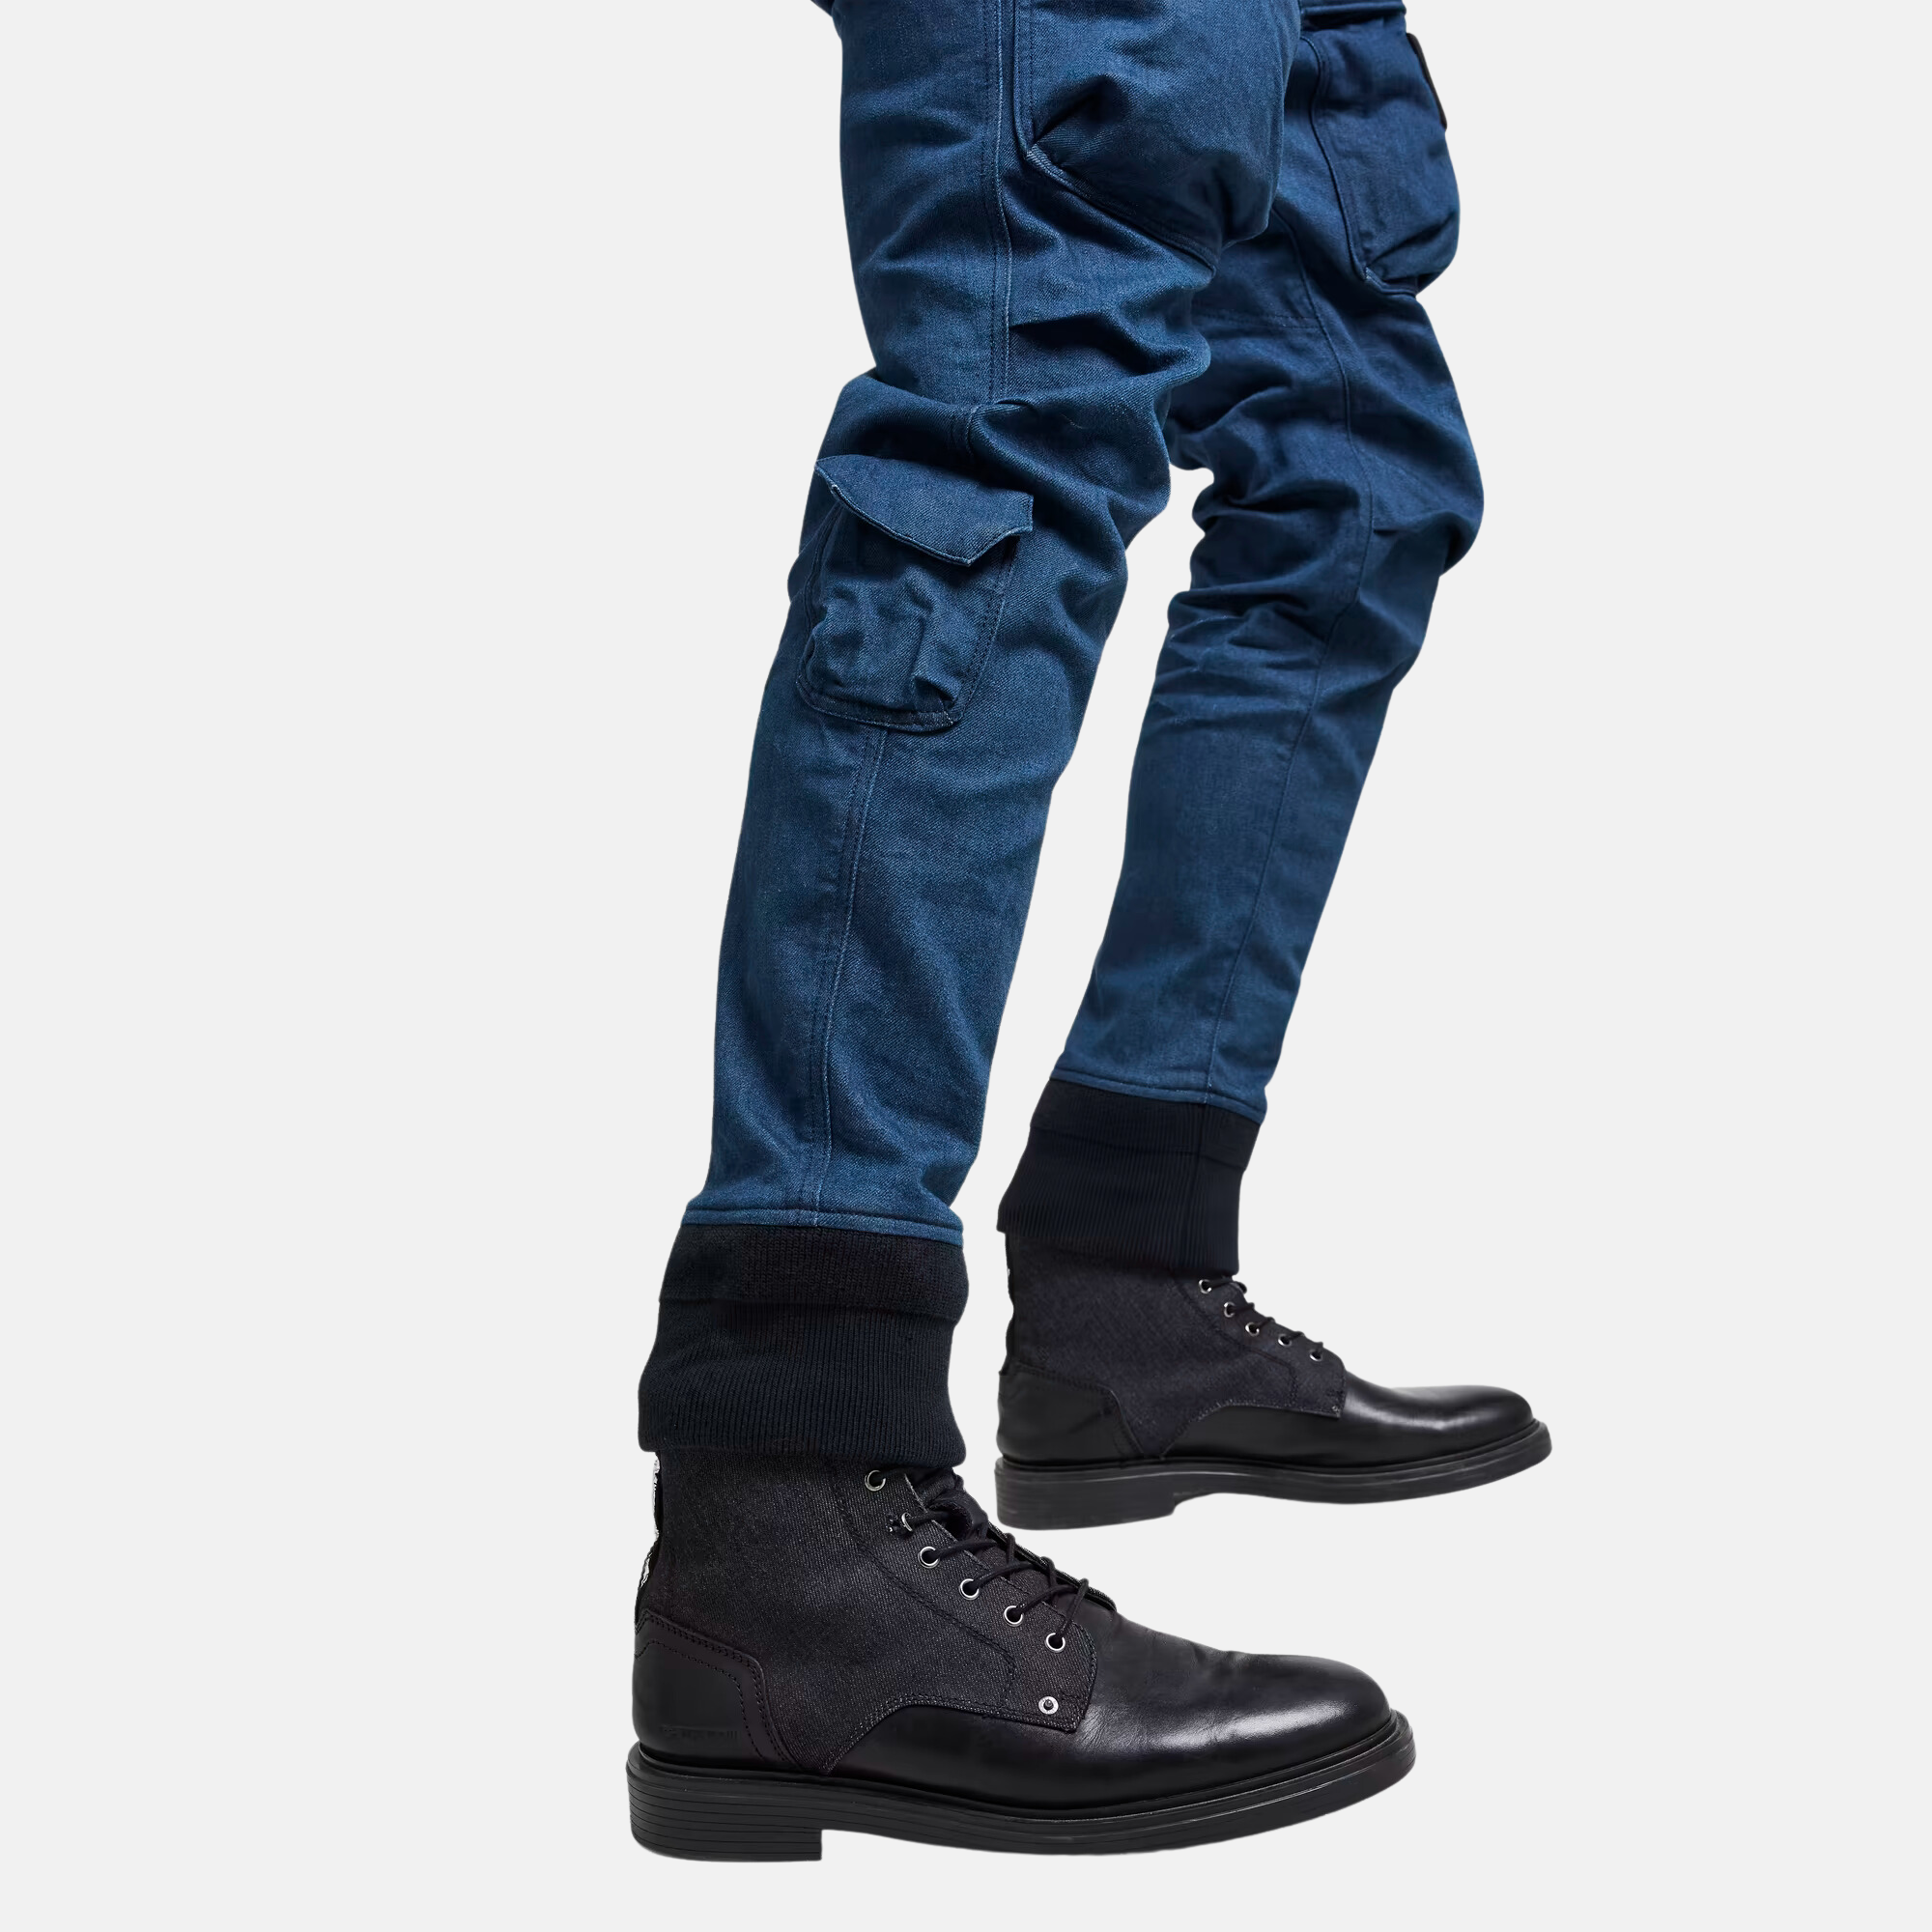 G-Star Raw Relaxed Tapered Navy Cargo Jeans